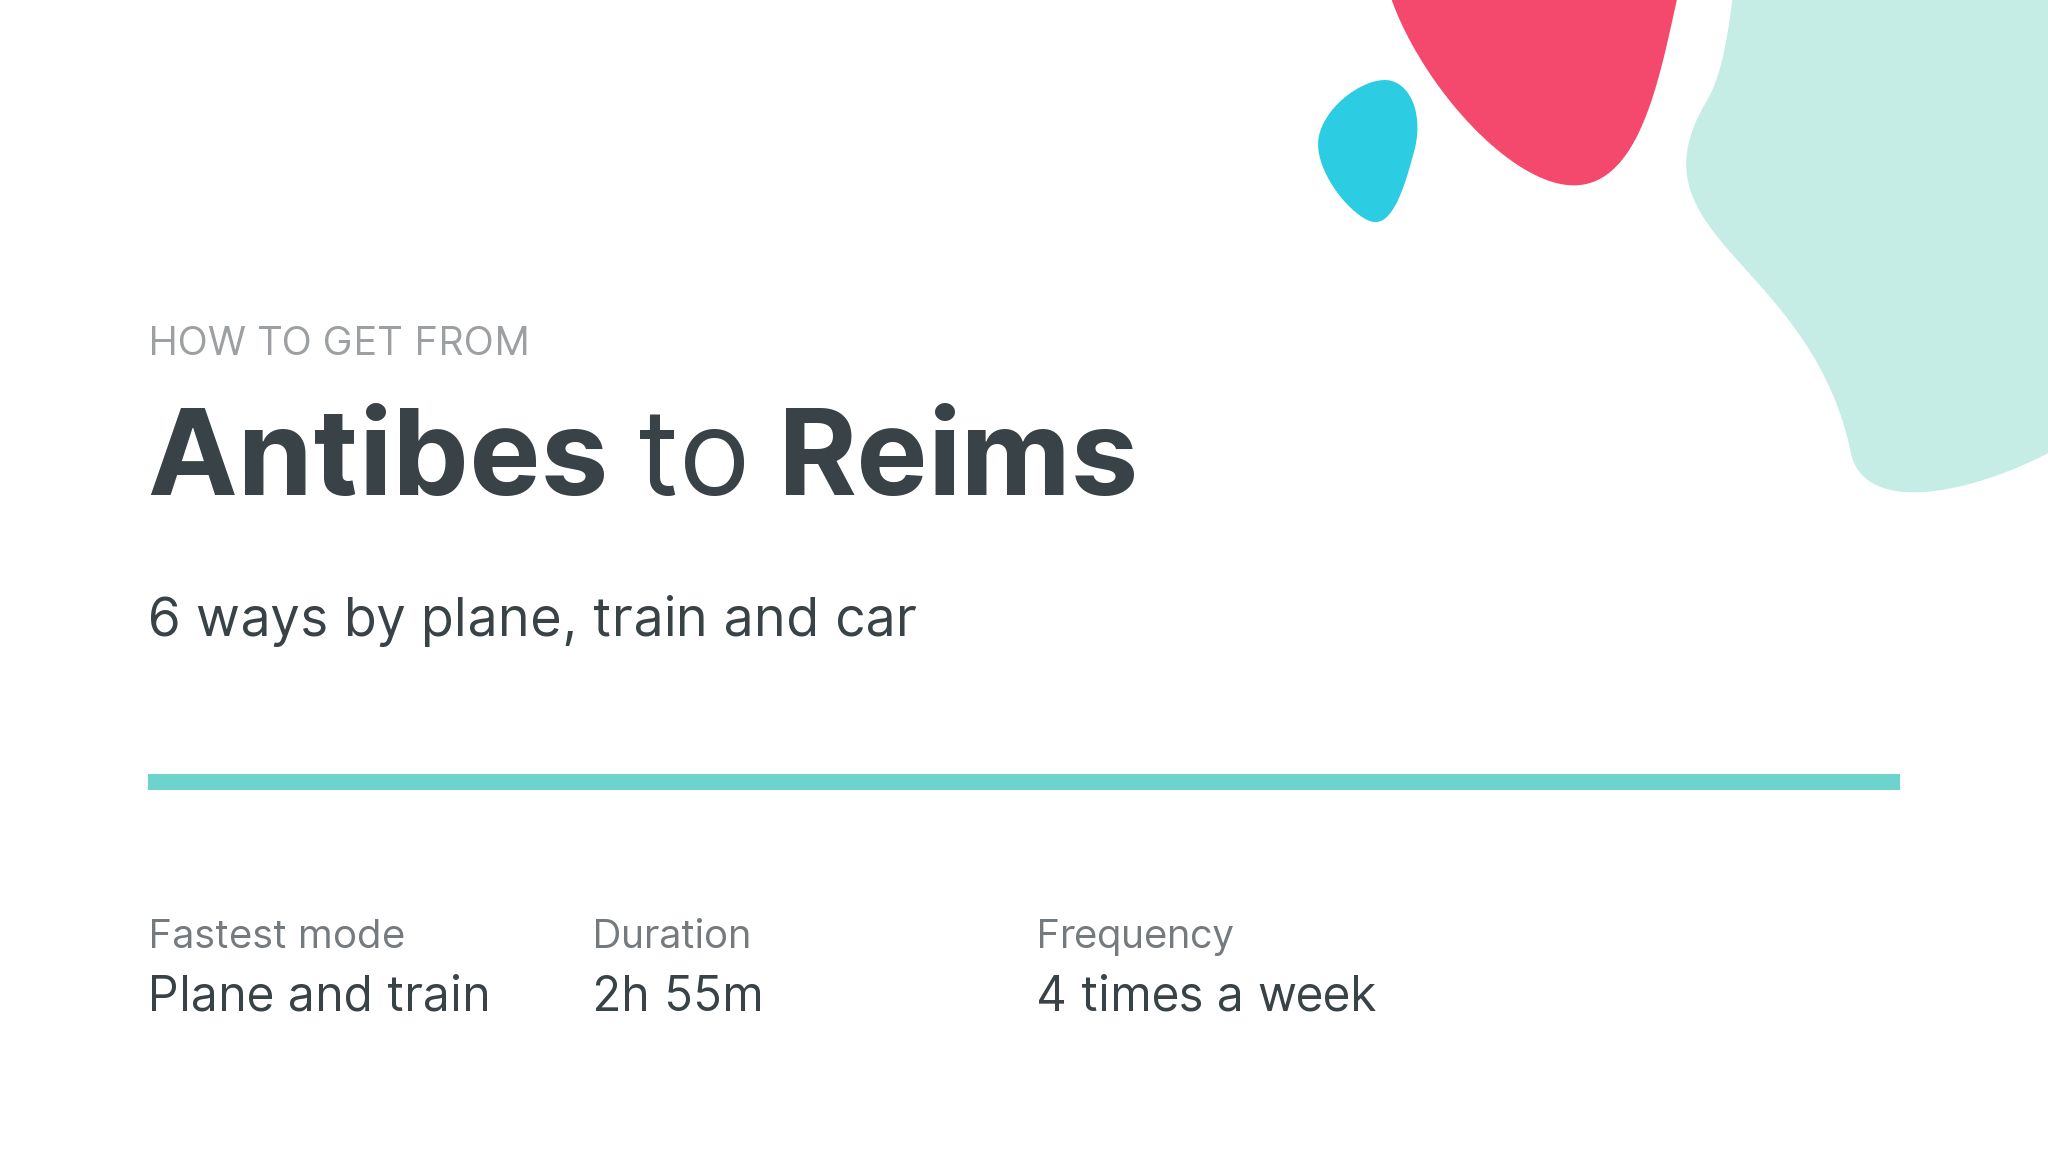 How do I get from Antibes to Reims